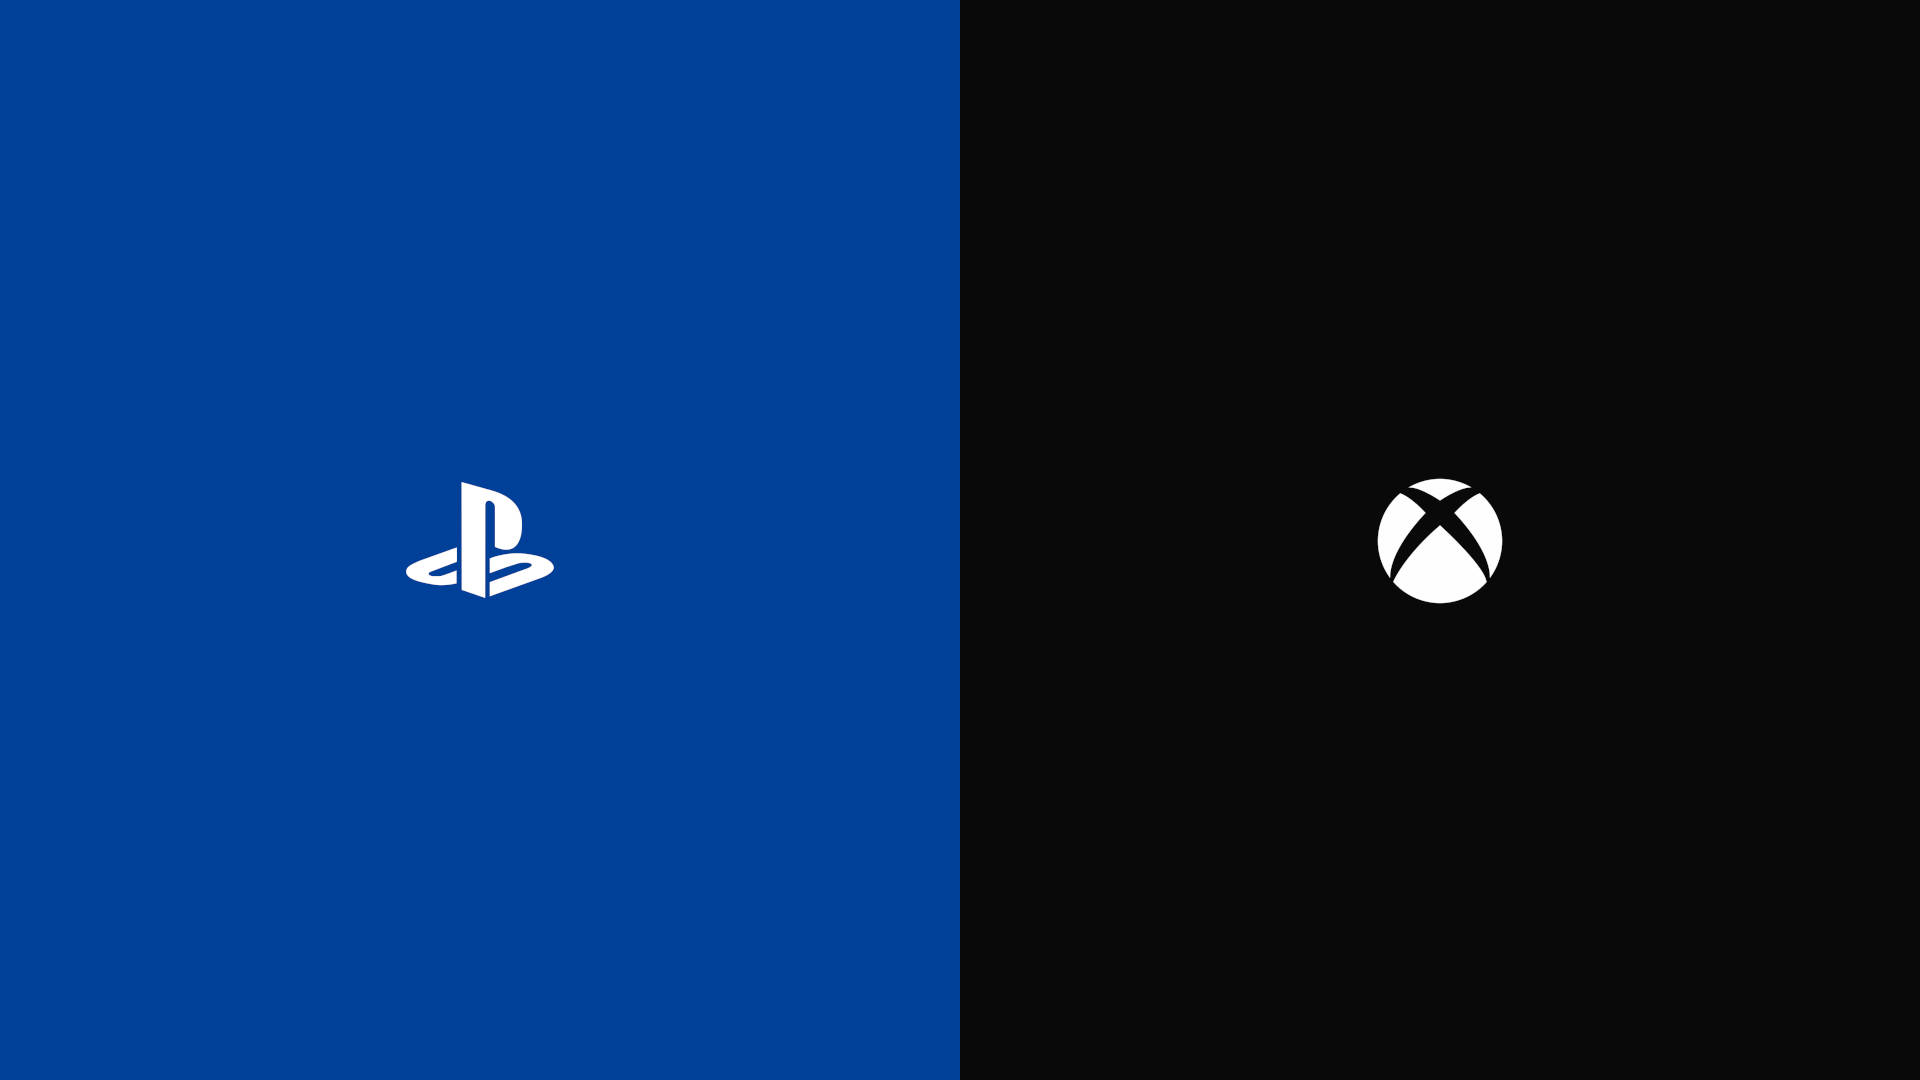 Ps4 Logo And Xbox Icon Background